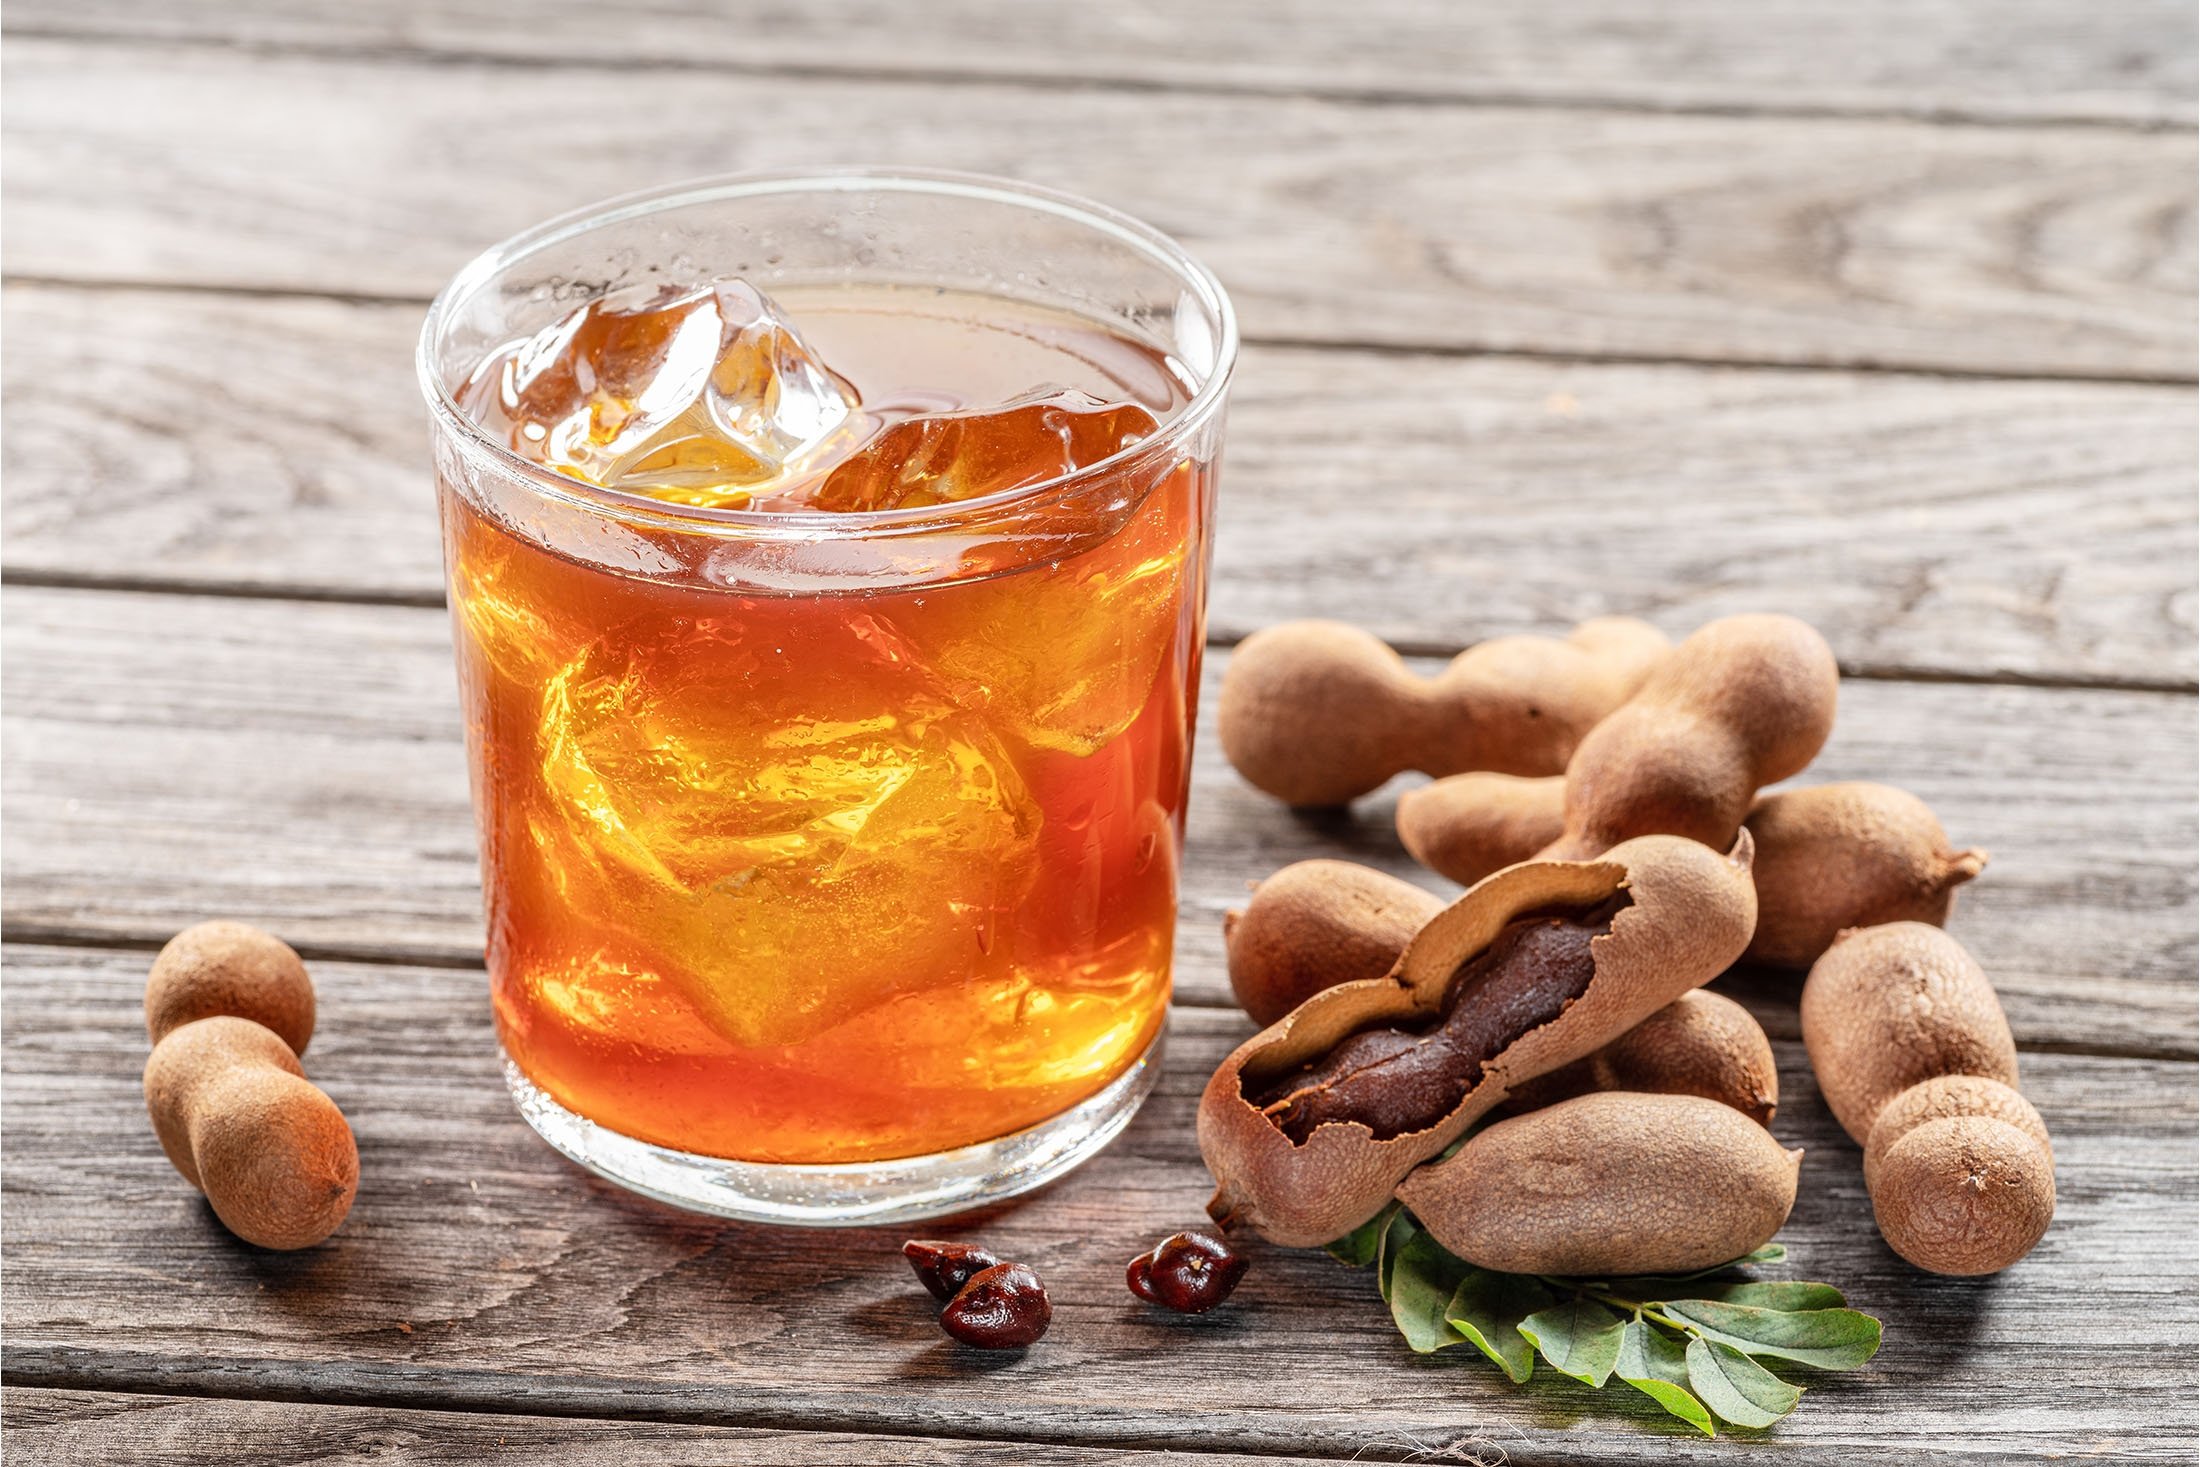 The tamarind fruit is said to have many health benefits.  (Shutterstock photo)